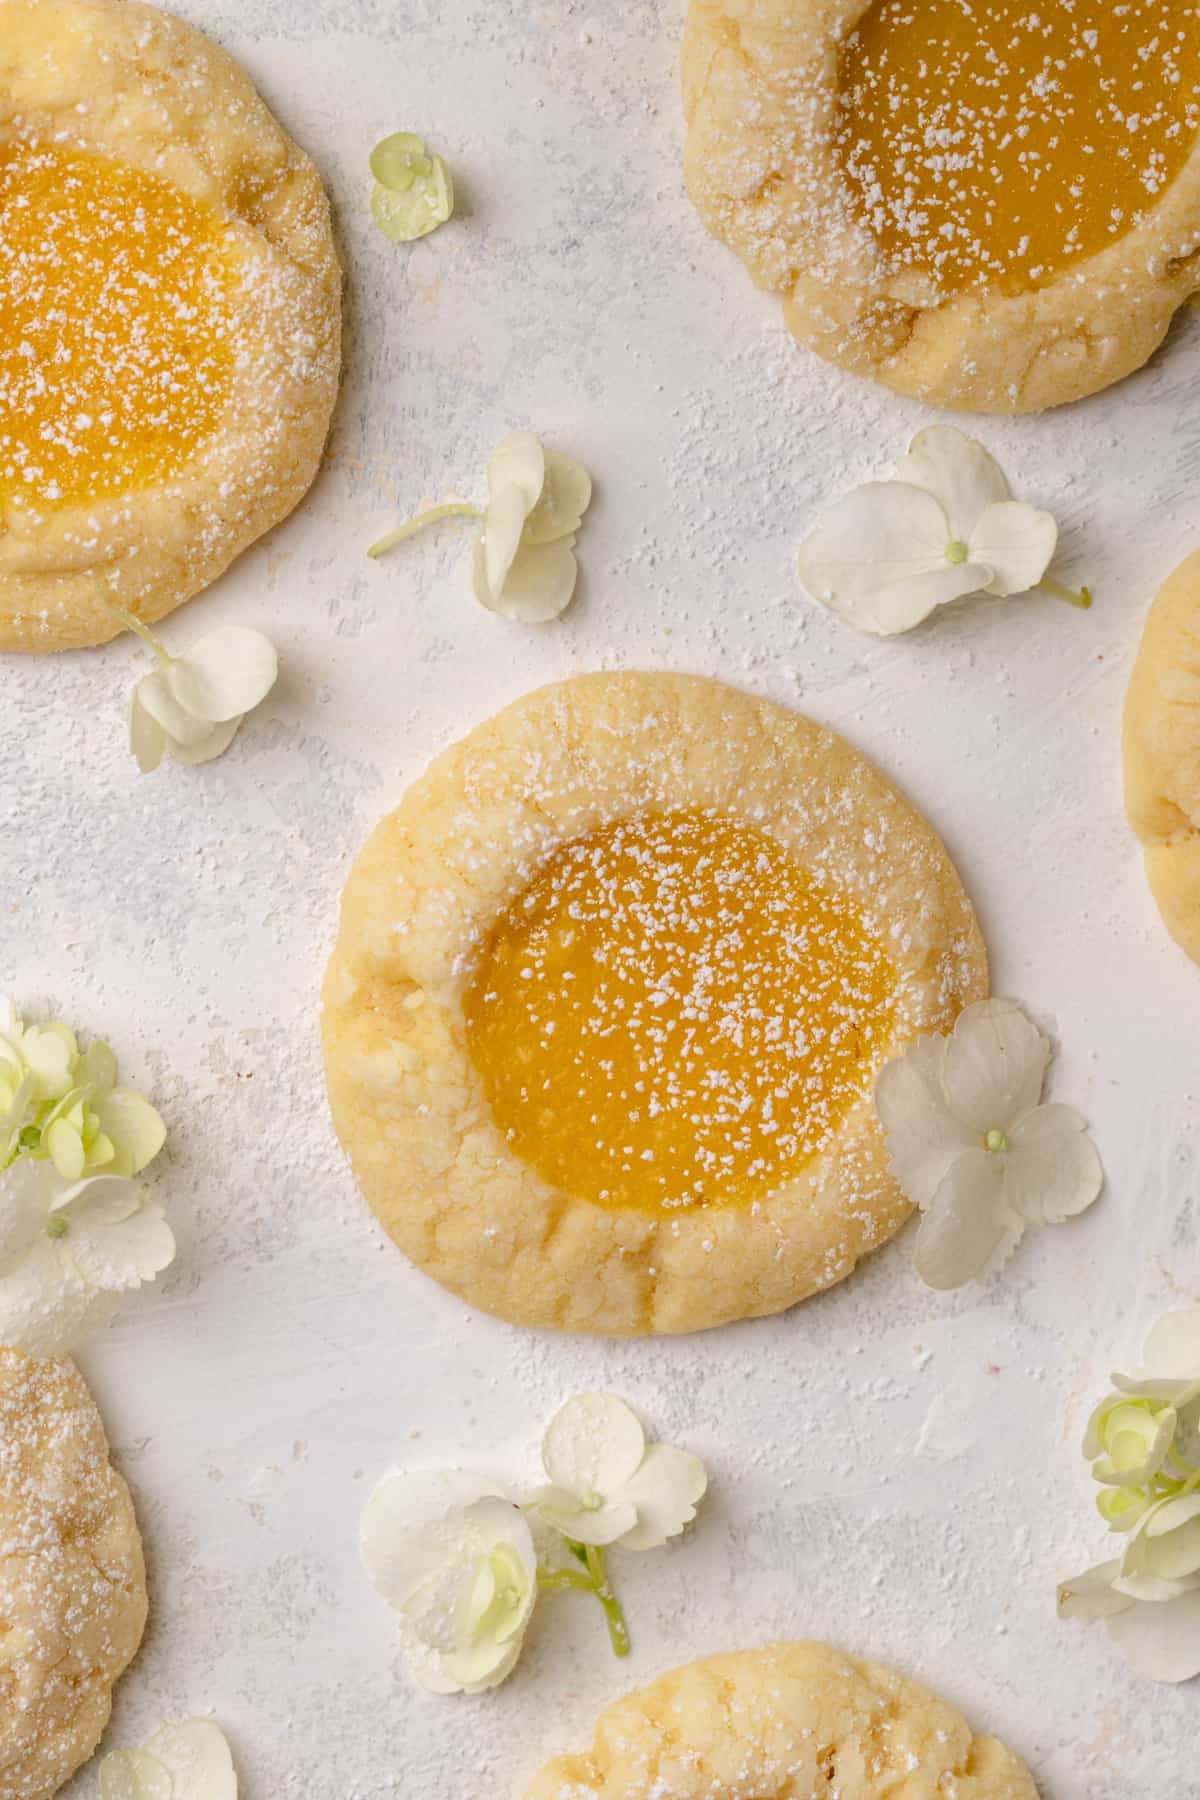 Lemon bar cookies on a white surface with flowers.